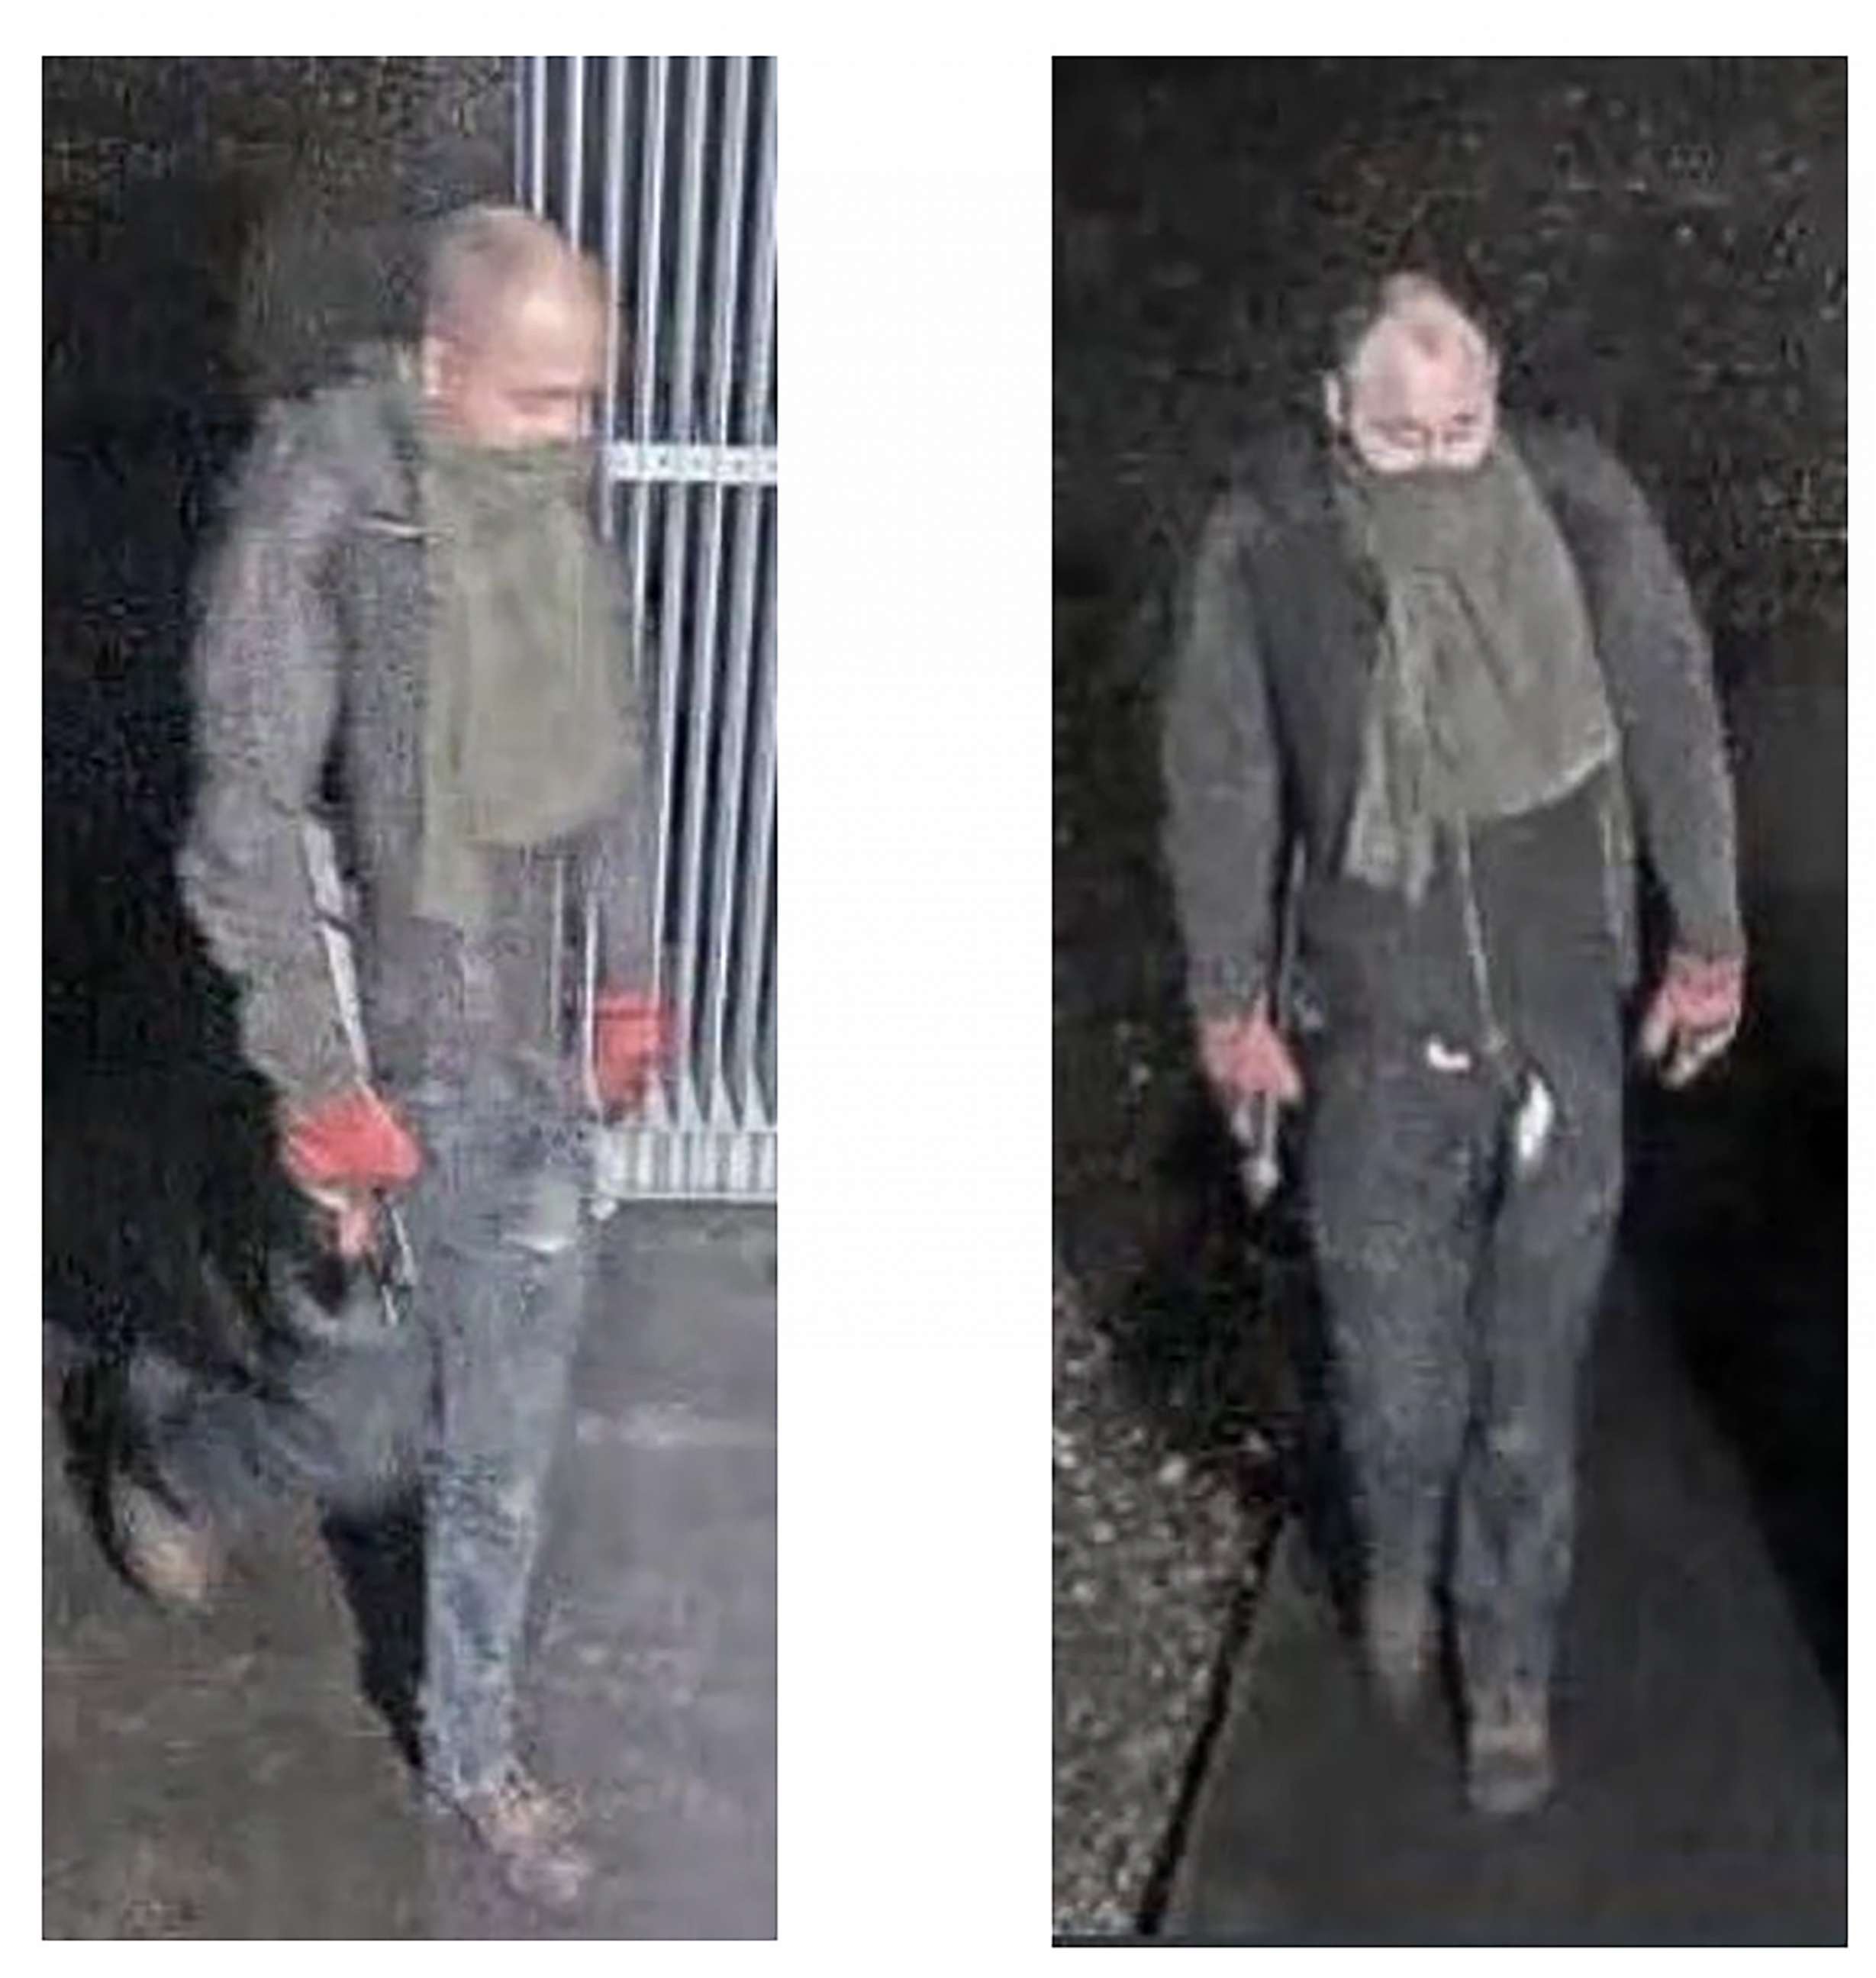 PHOTO: Federal prosecutors said a suspect was captured in surveillance footage at the time of one the substation attacks in Pierce County on Dec. 25, 2022. A screenshot of the suspect was included in a complaint filed by the Department of Justice.